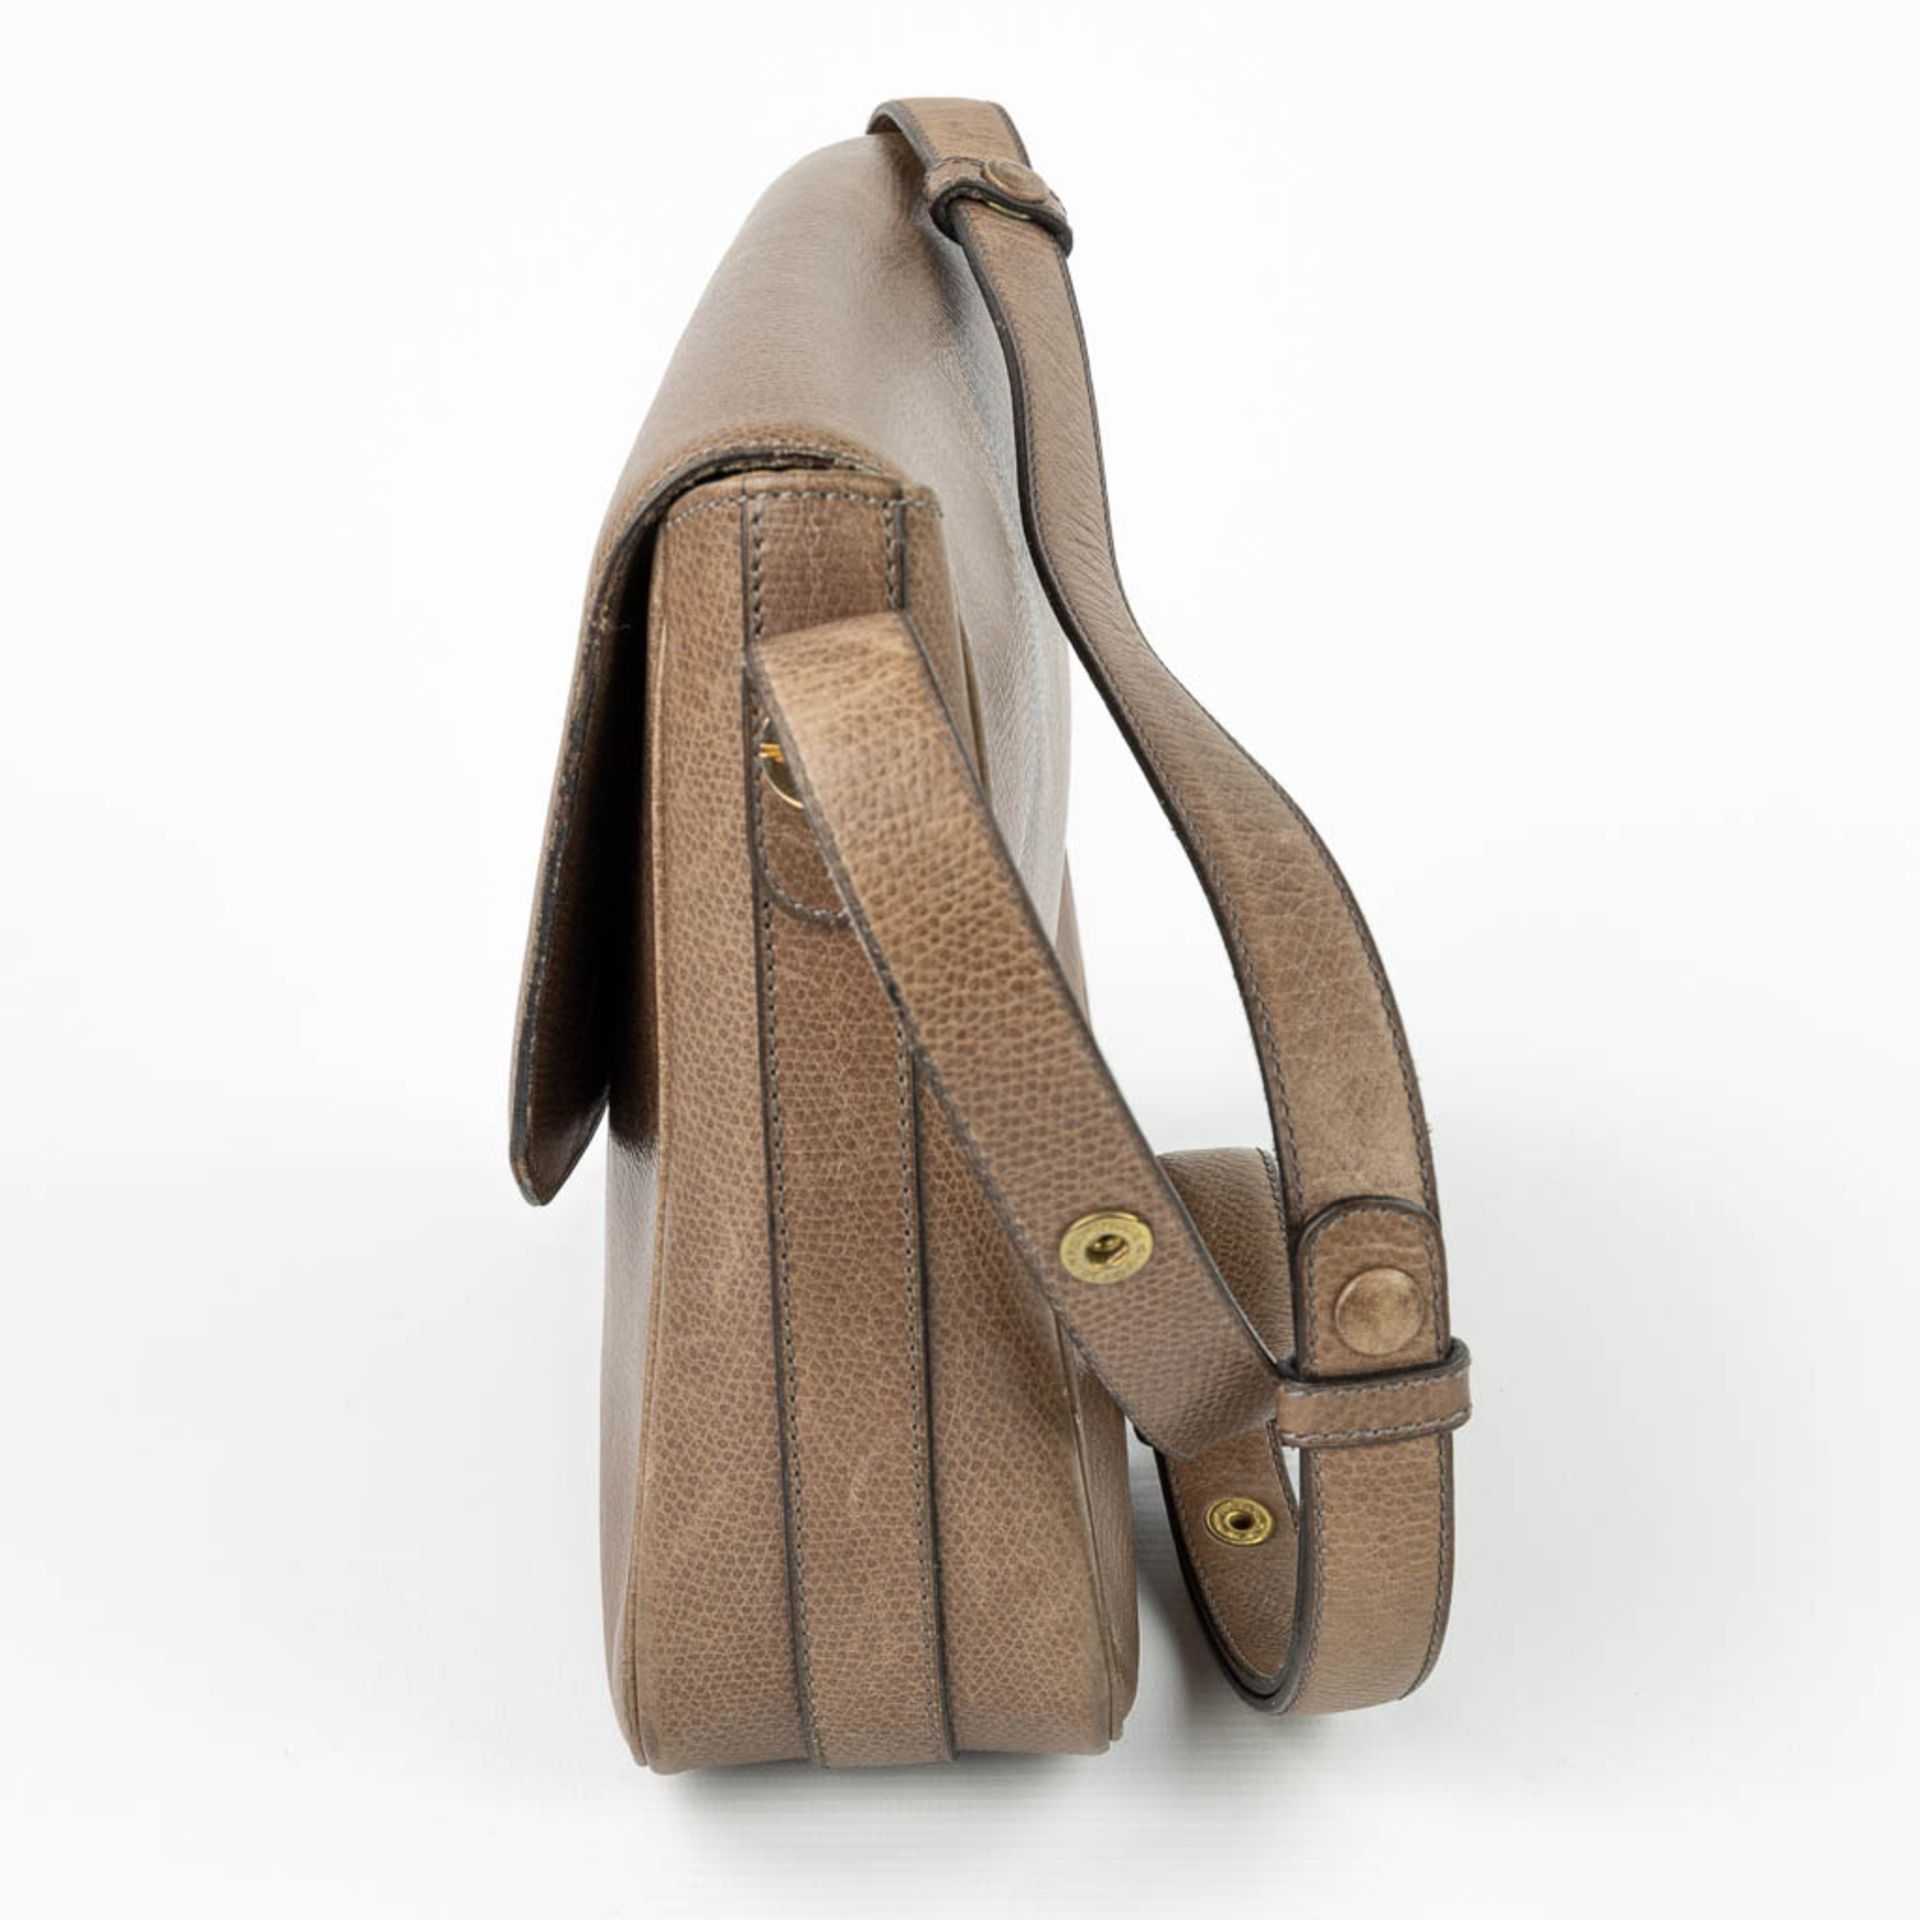 A handbag made of brown leather and marked Delvaux. (H:22cm) - Image 3 of 14